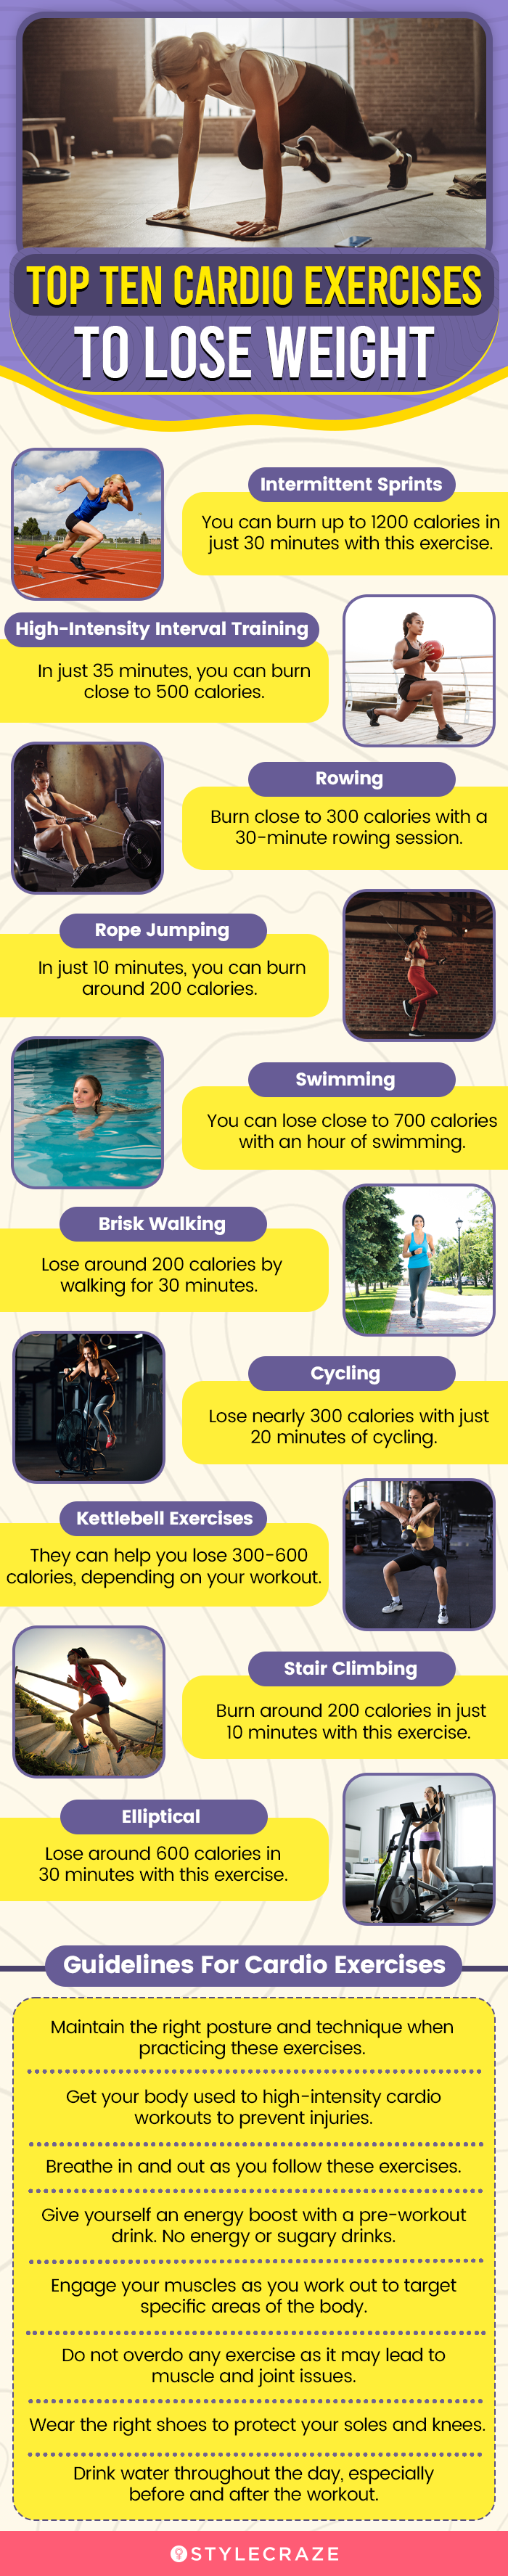 top ten cardio exercises to lose weight(infographic)